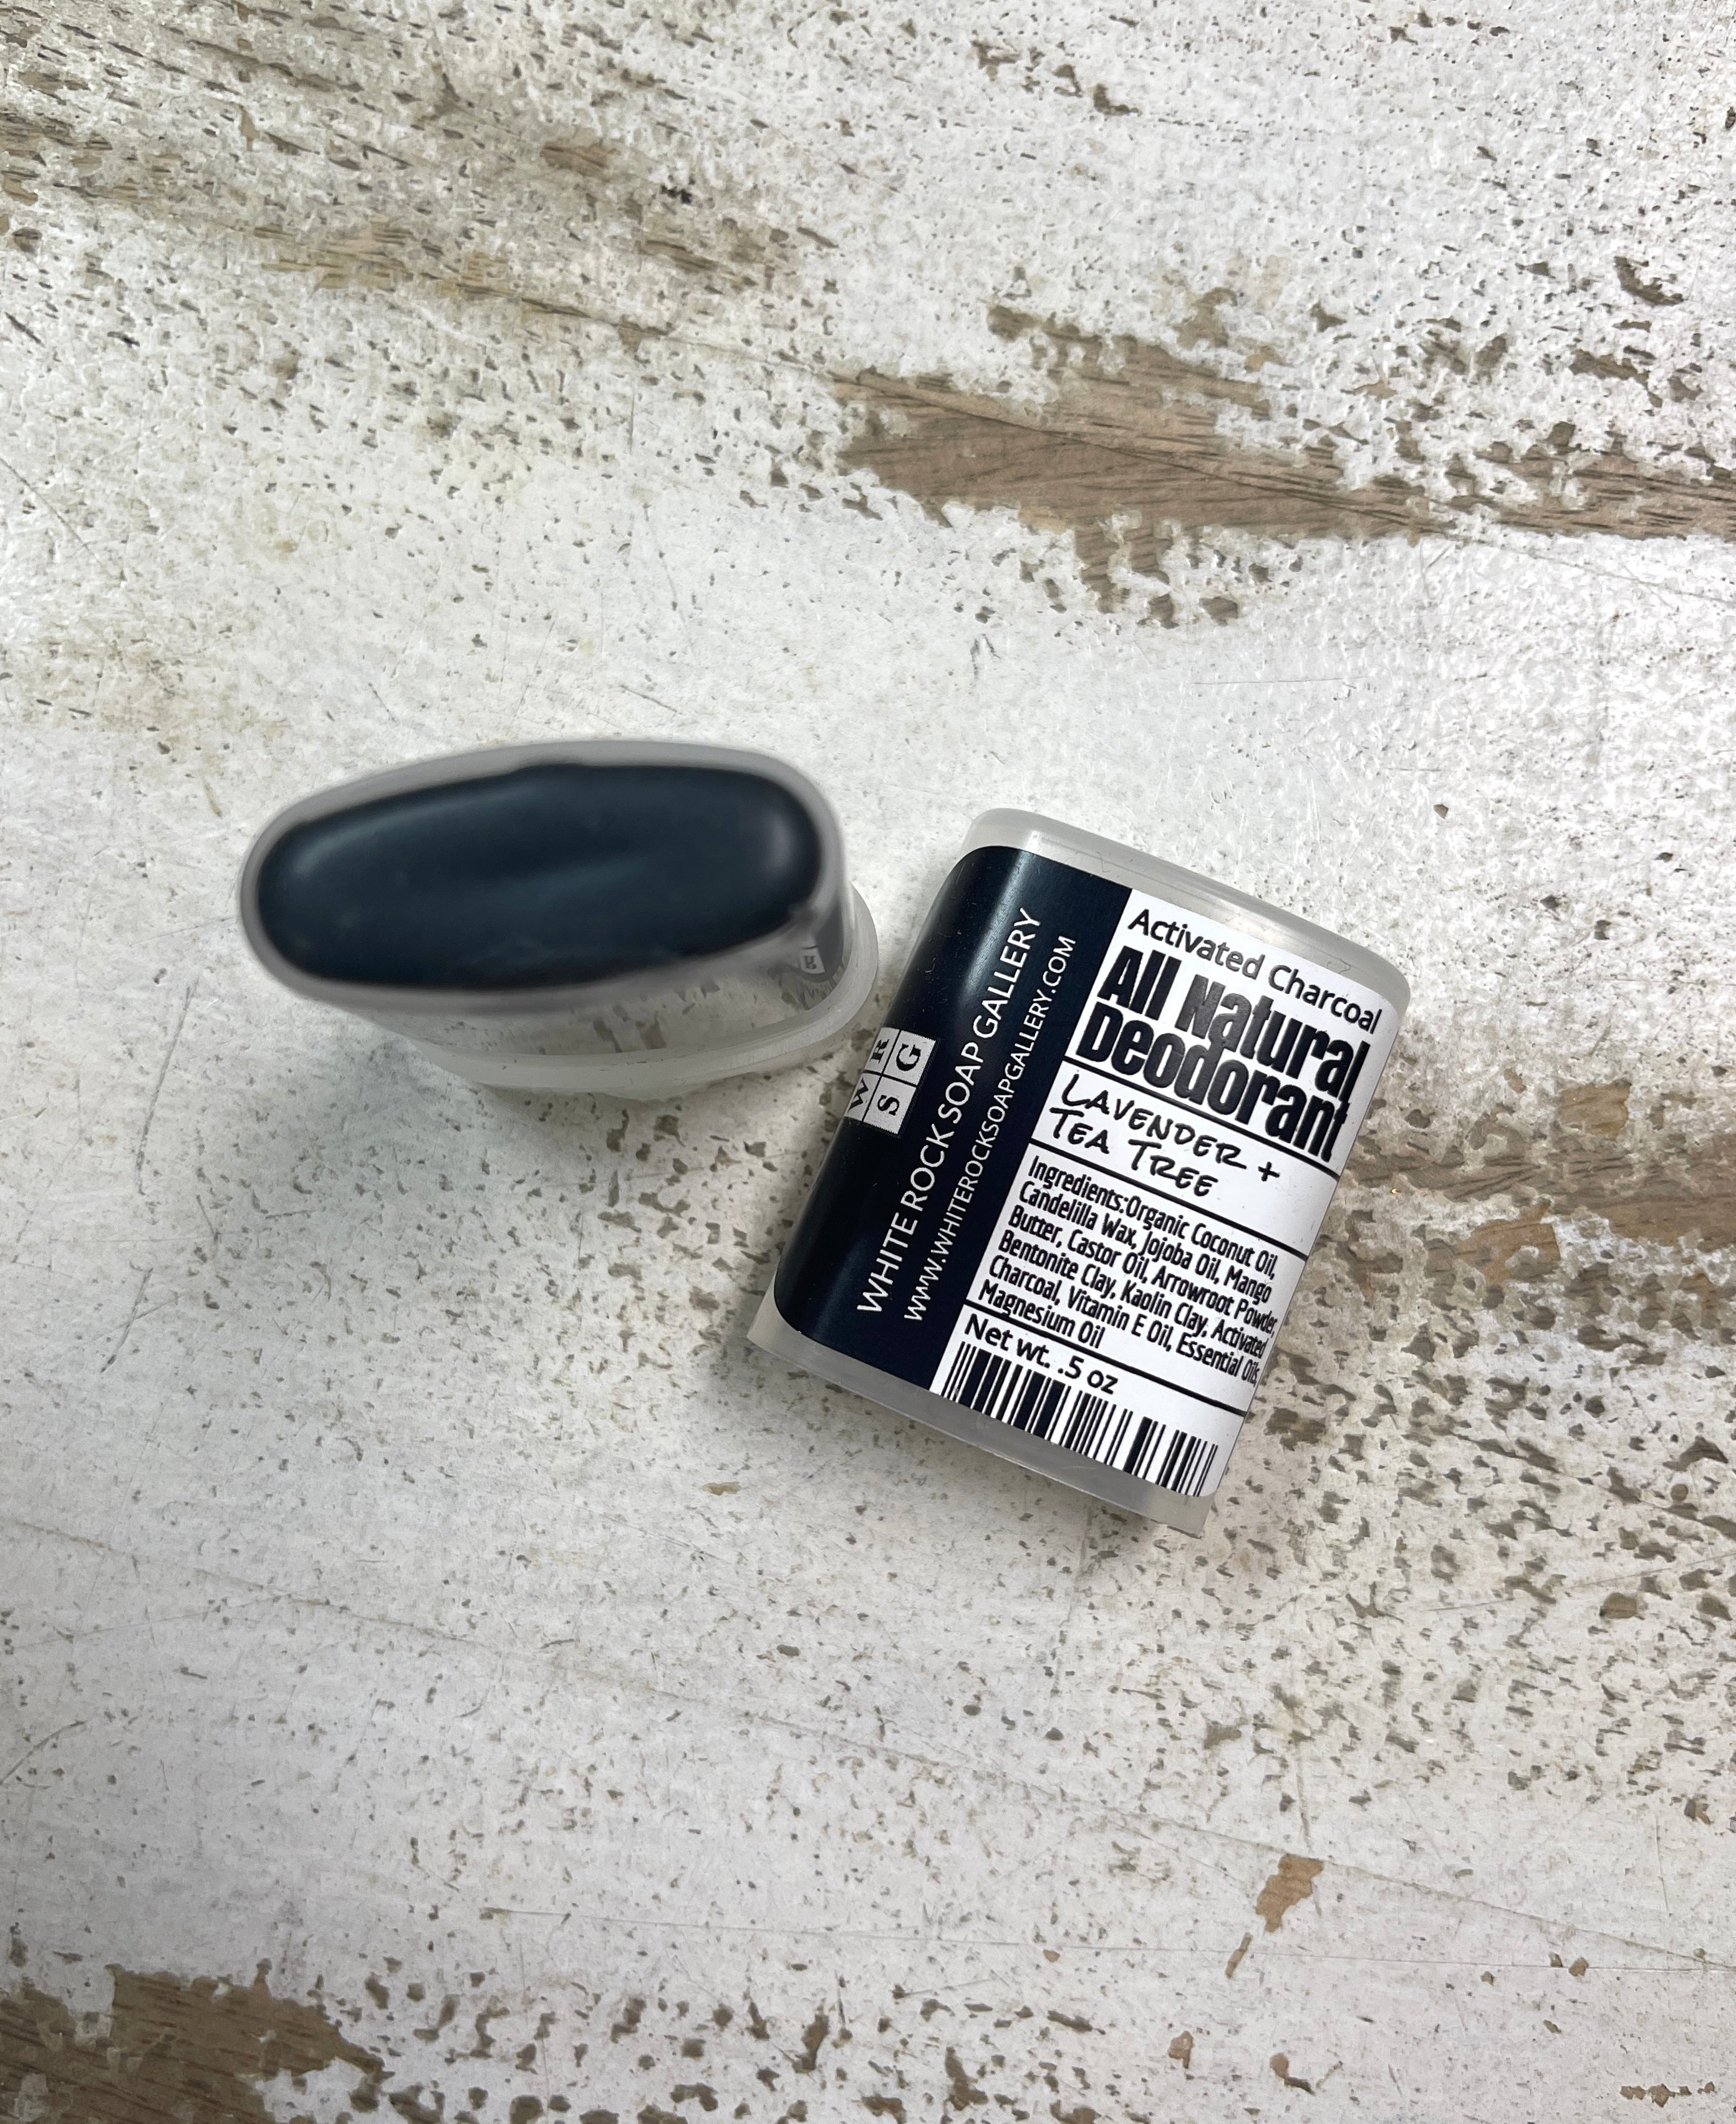 Activated Charcoal Aluminum Free Deodorant - Travel Size